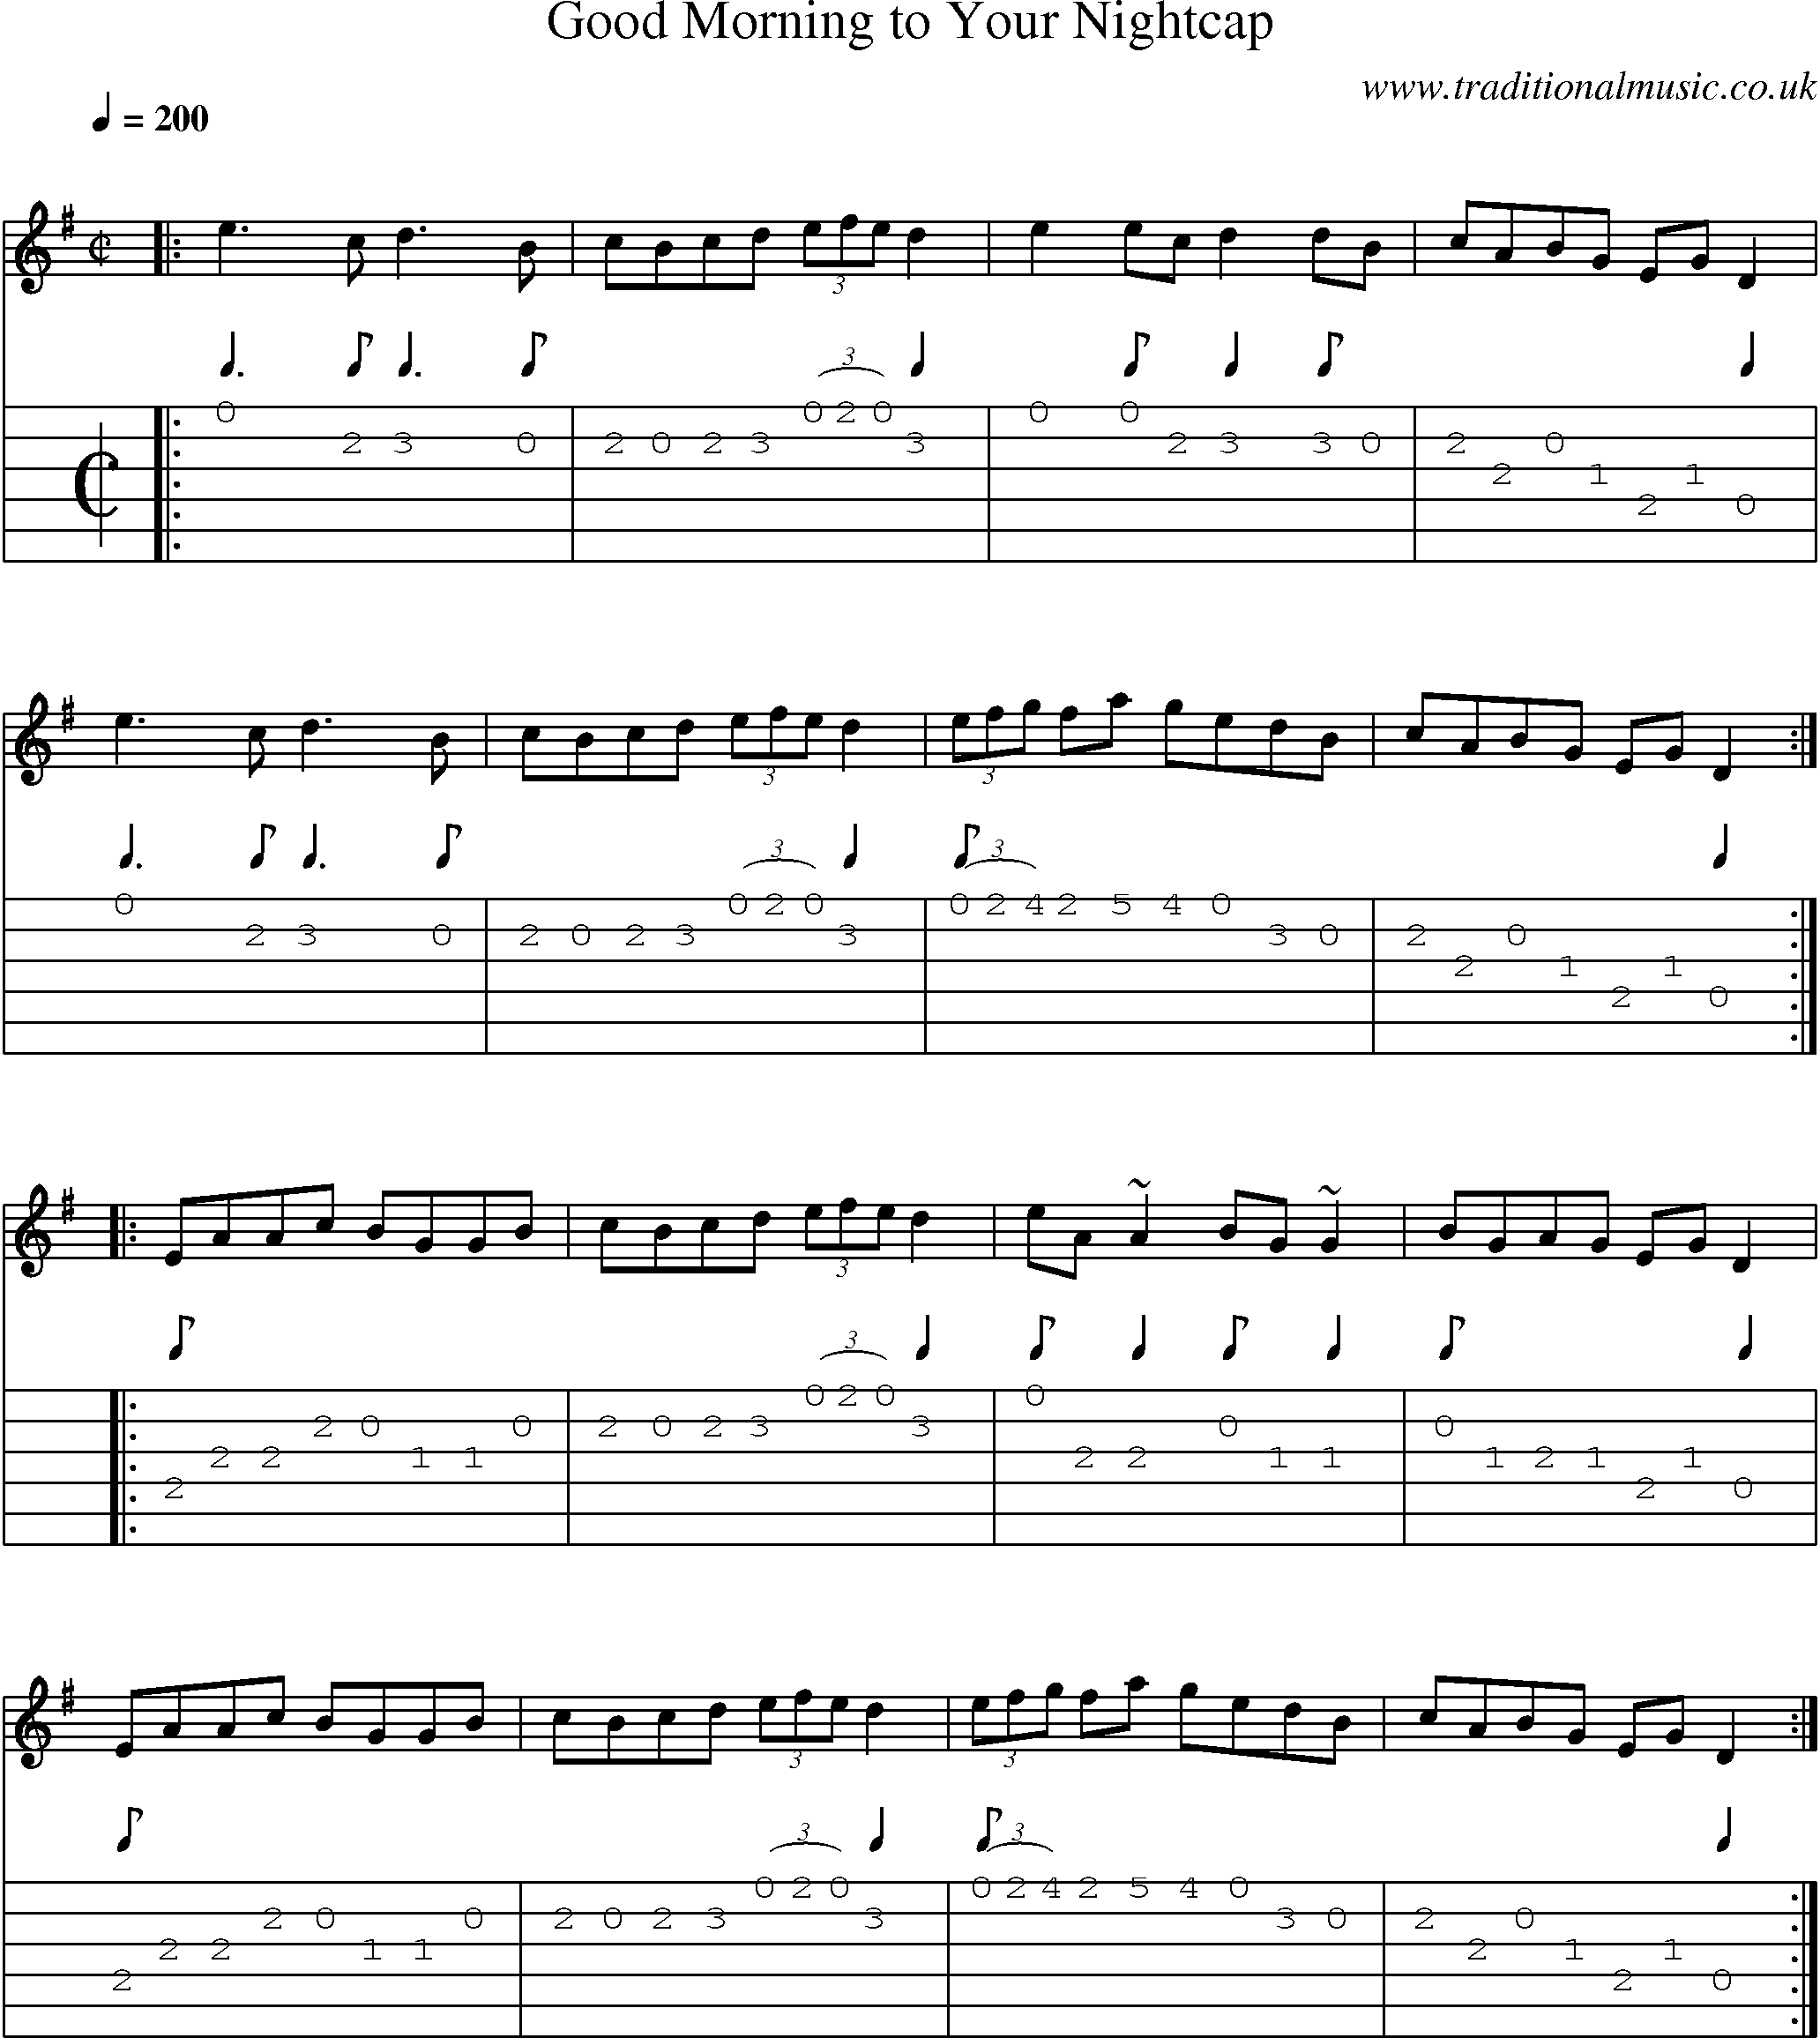 Music Score and Guitar Tabs for Good Morning To Your Nightcap